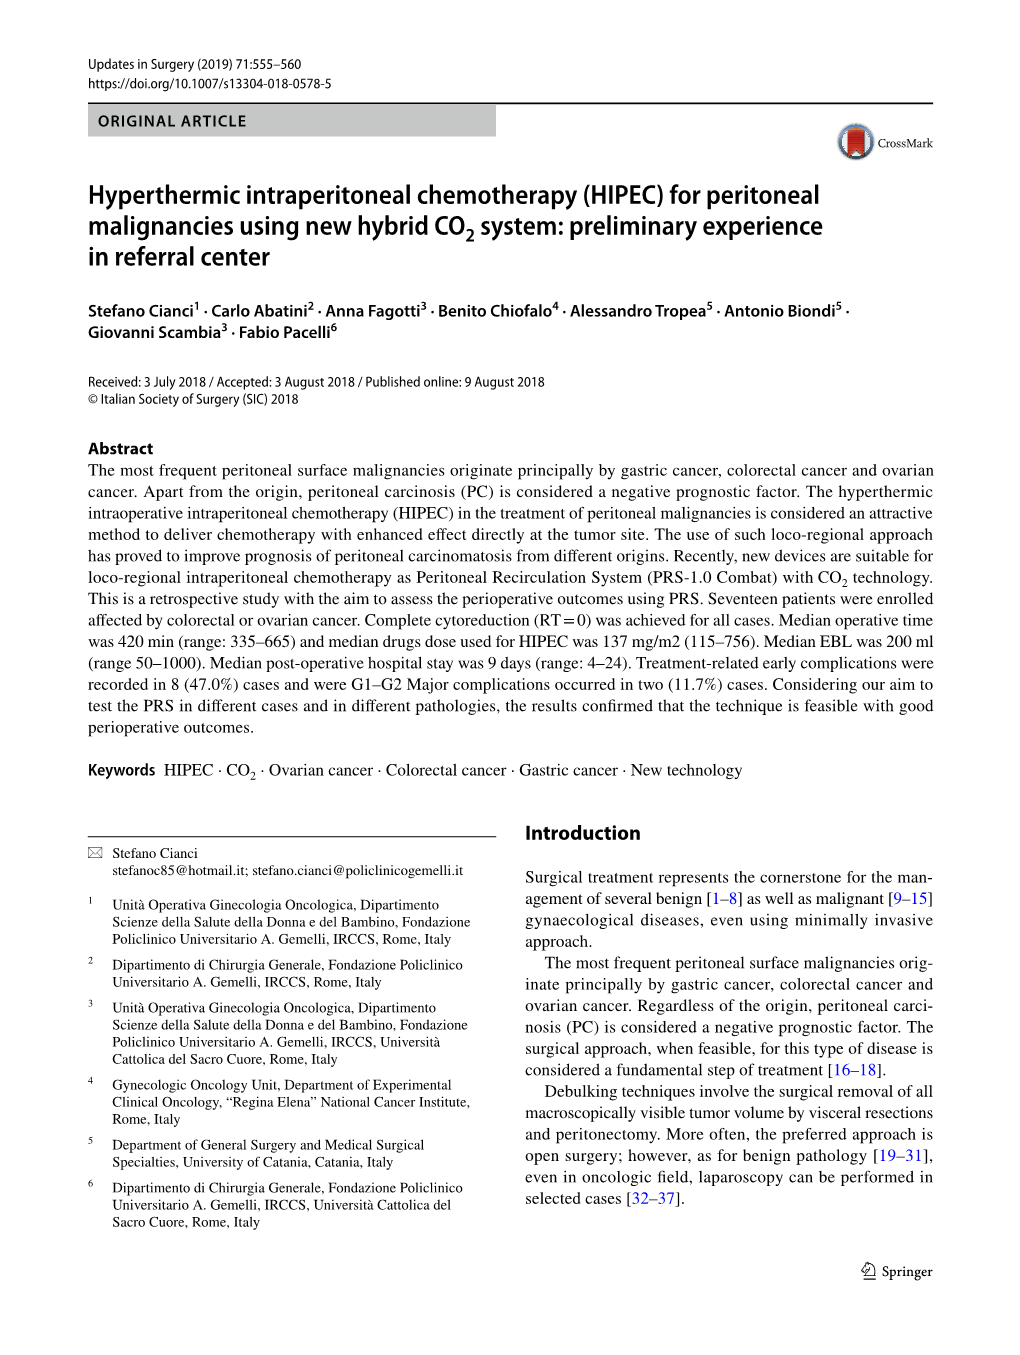 Hyperthermic Intraperitoneal Chemotherapy (HIPEC) for Peritoneal Malignancies Using New Hybrid ­CO2 System: Preliminary Experience in Referral Center